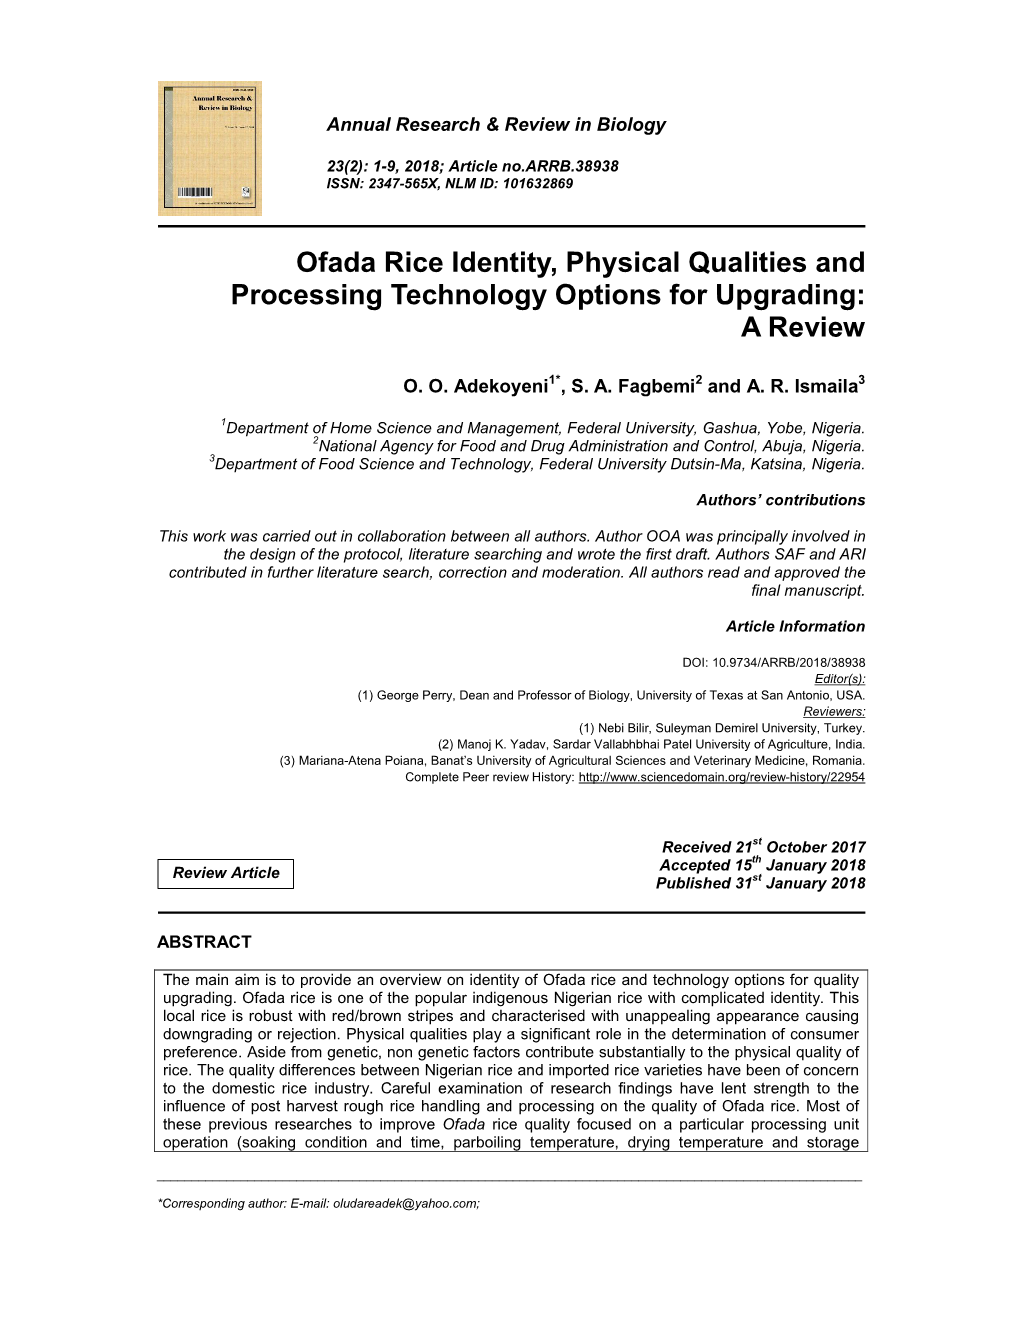 Ofada Rice Identity, Physical Qualities and Processing Technology Options for Upgrading: a Review